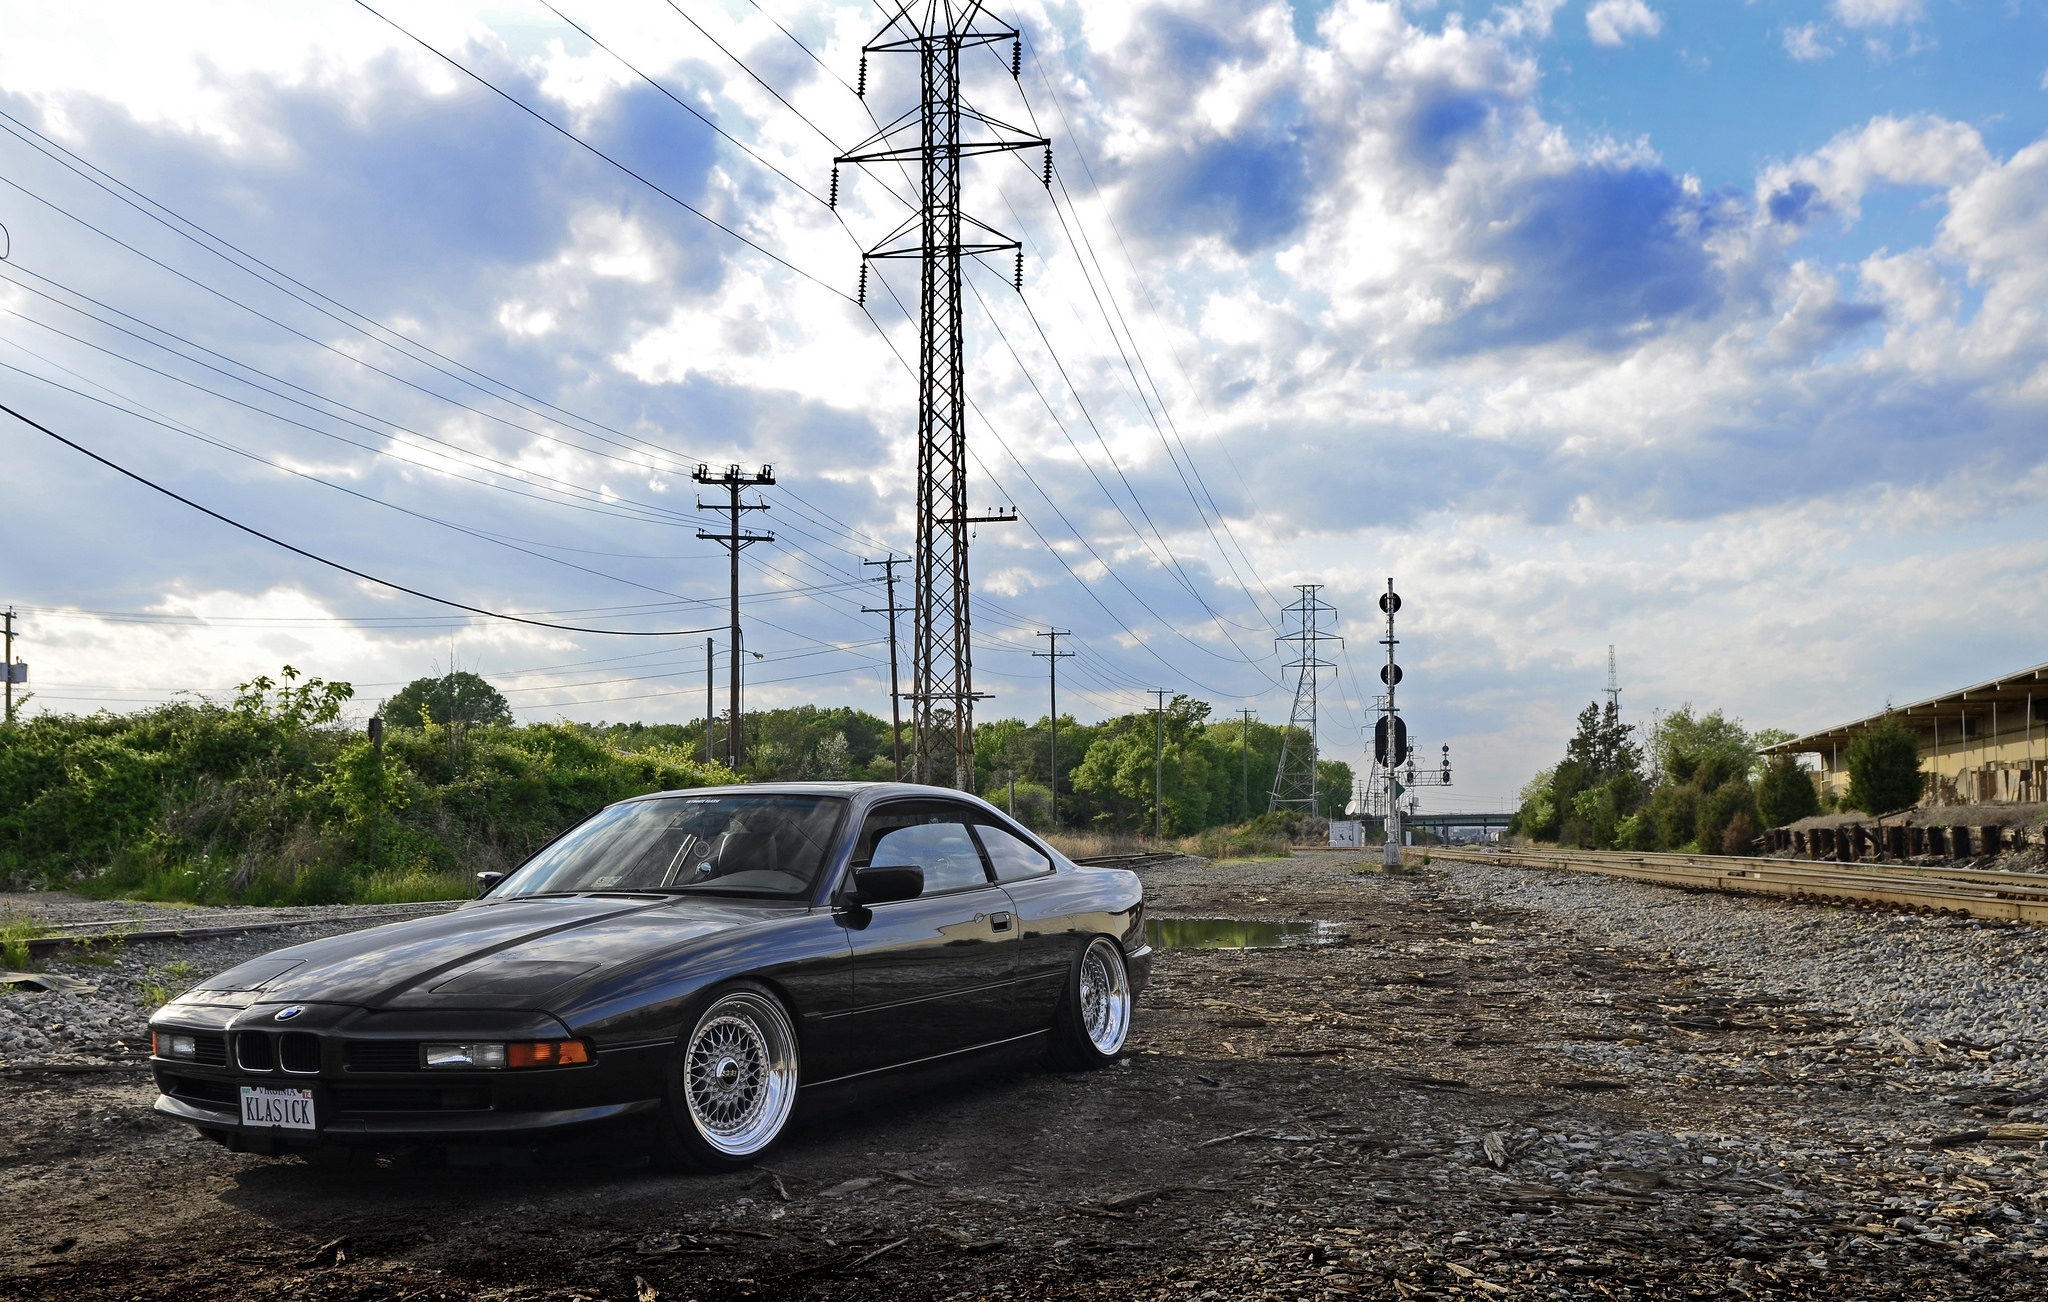 Bmw E31 Wallpapers Wallpaper Cave Images, Photos, Reviews